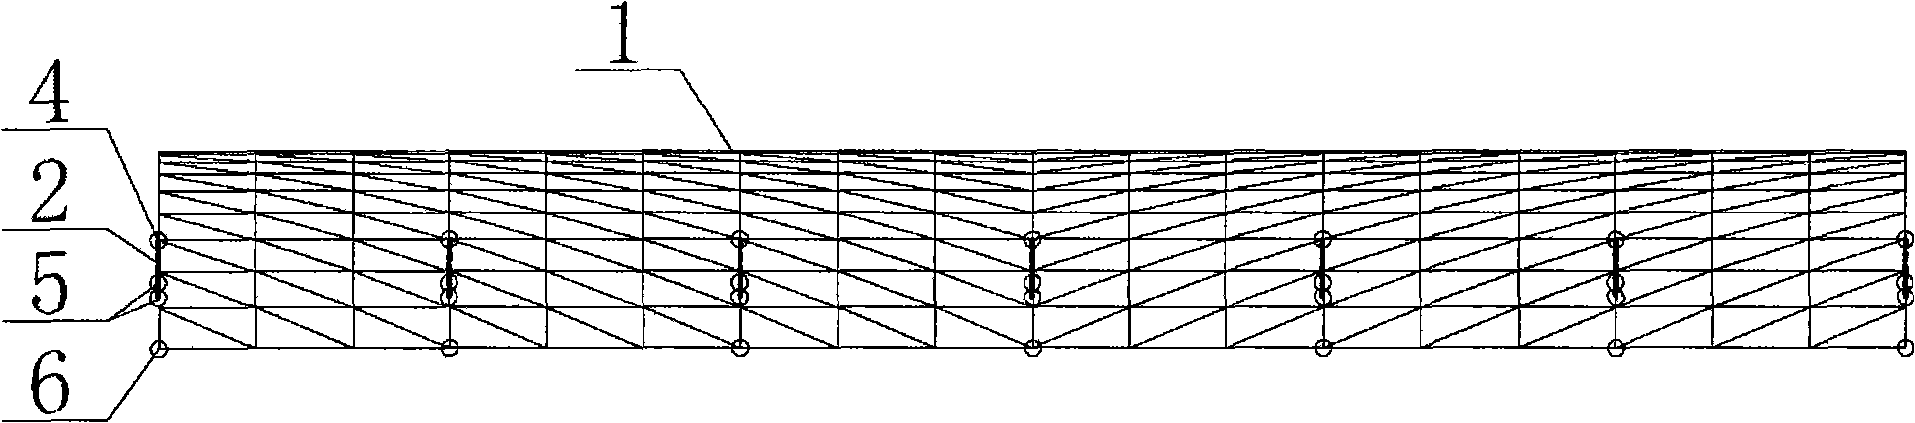 Chord branch barrel shell structure system